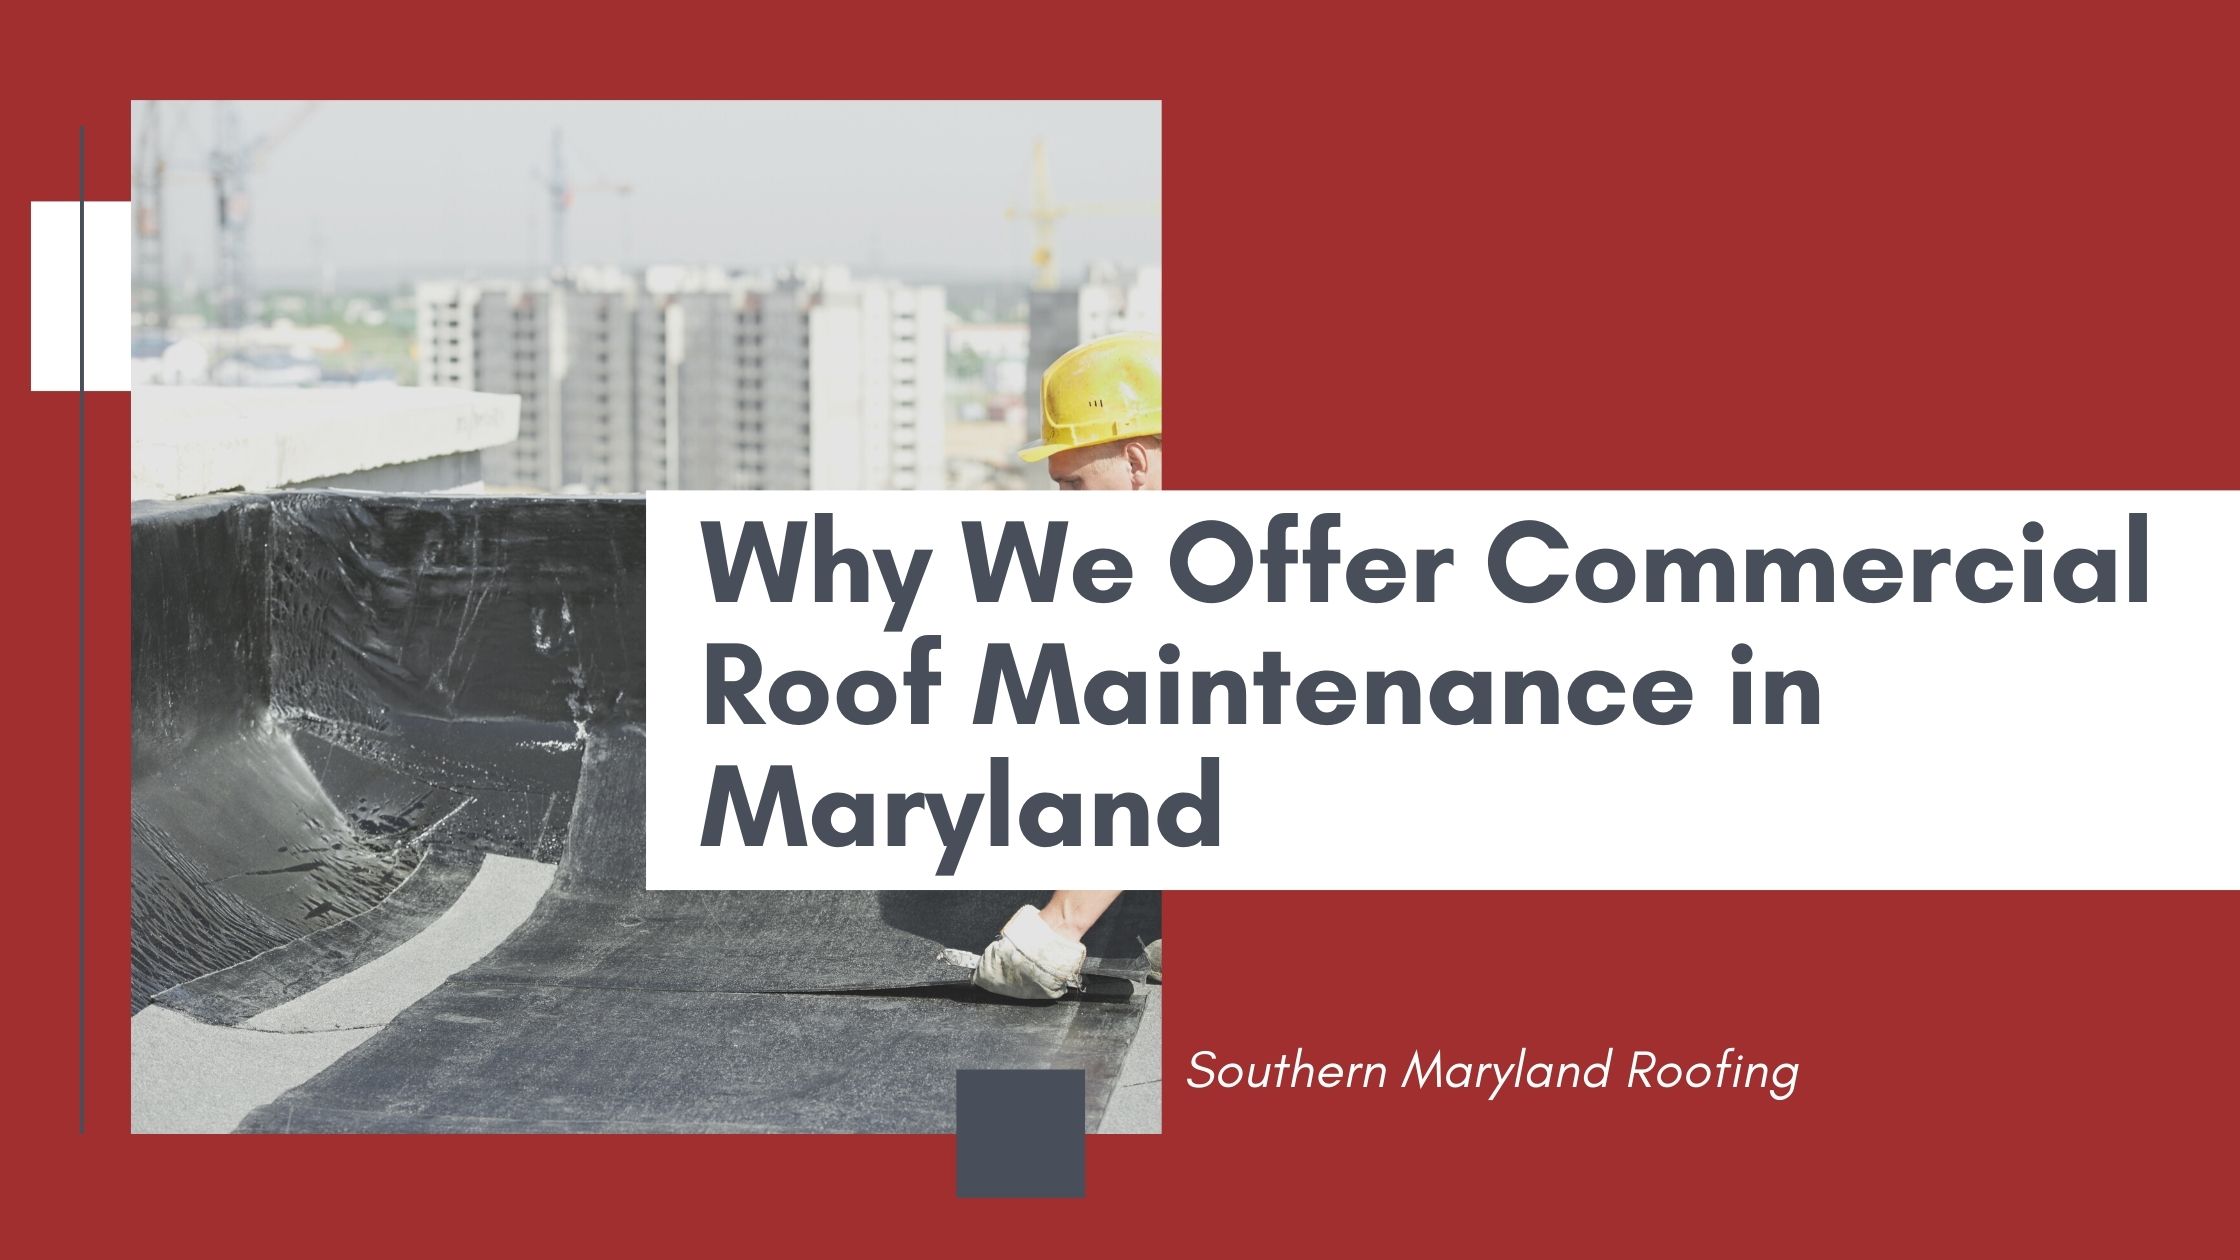 Why We Offer Commercial Roof Maintenance in Maryland